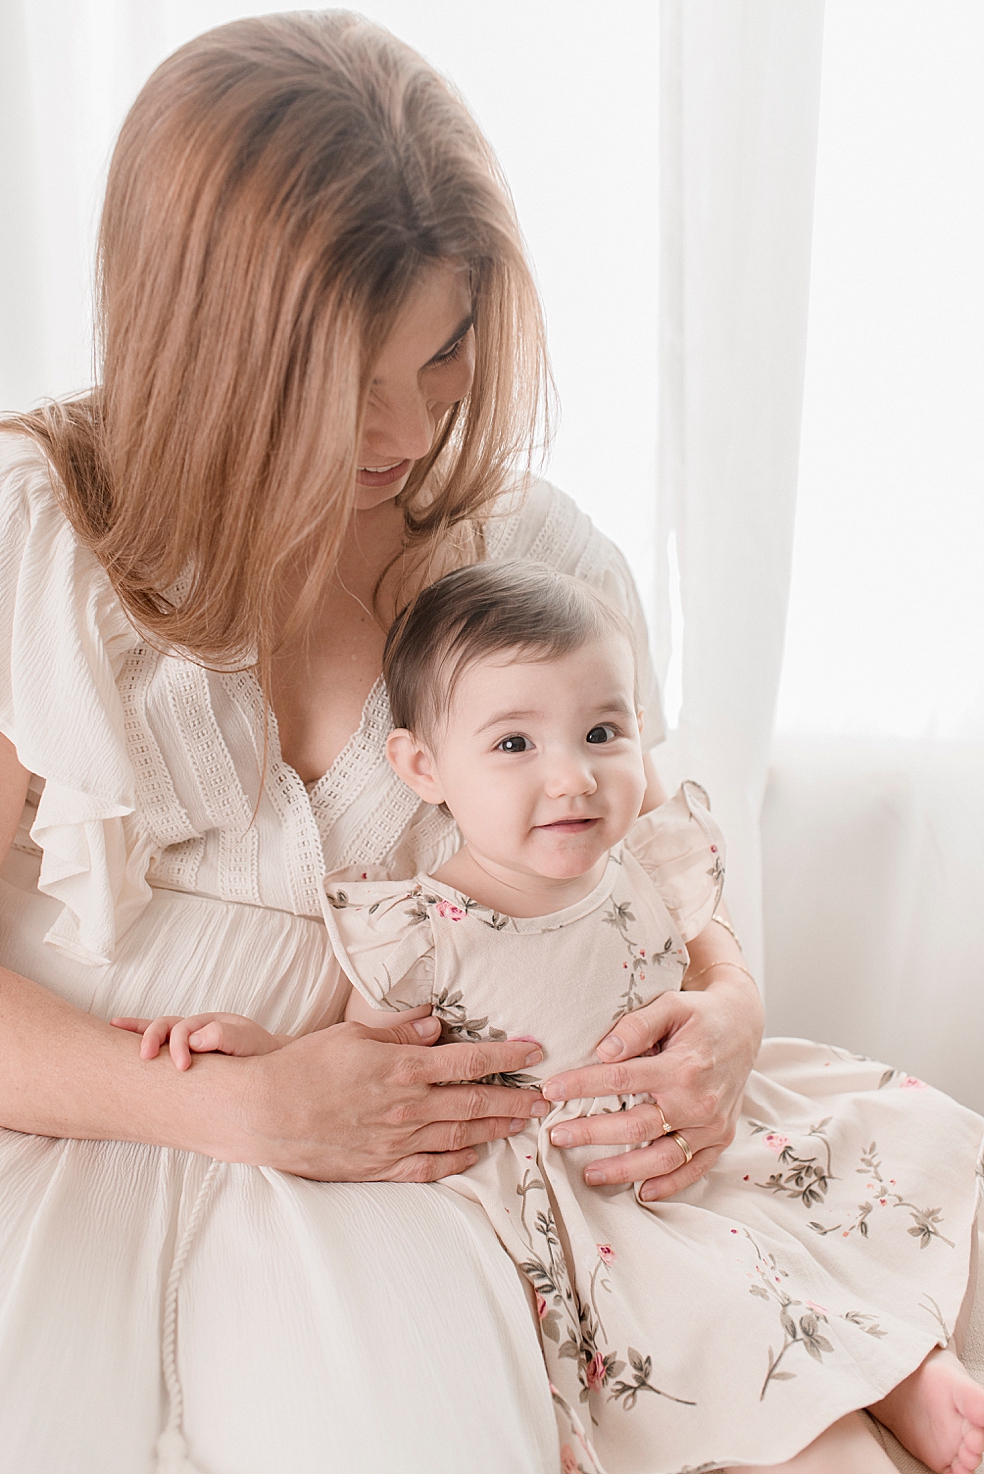 Baby girl and mom snuggling during her light and airy studio session | Photo by Jessica Lee Photography